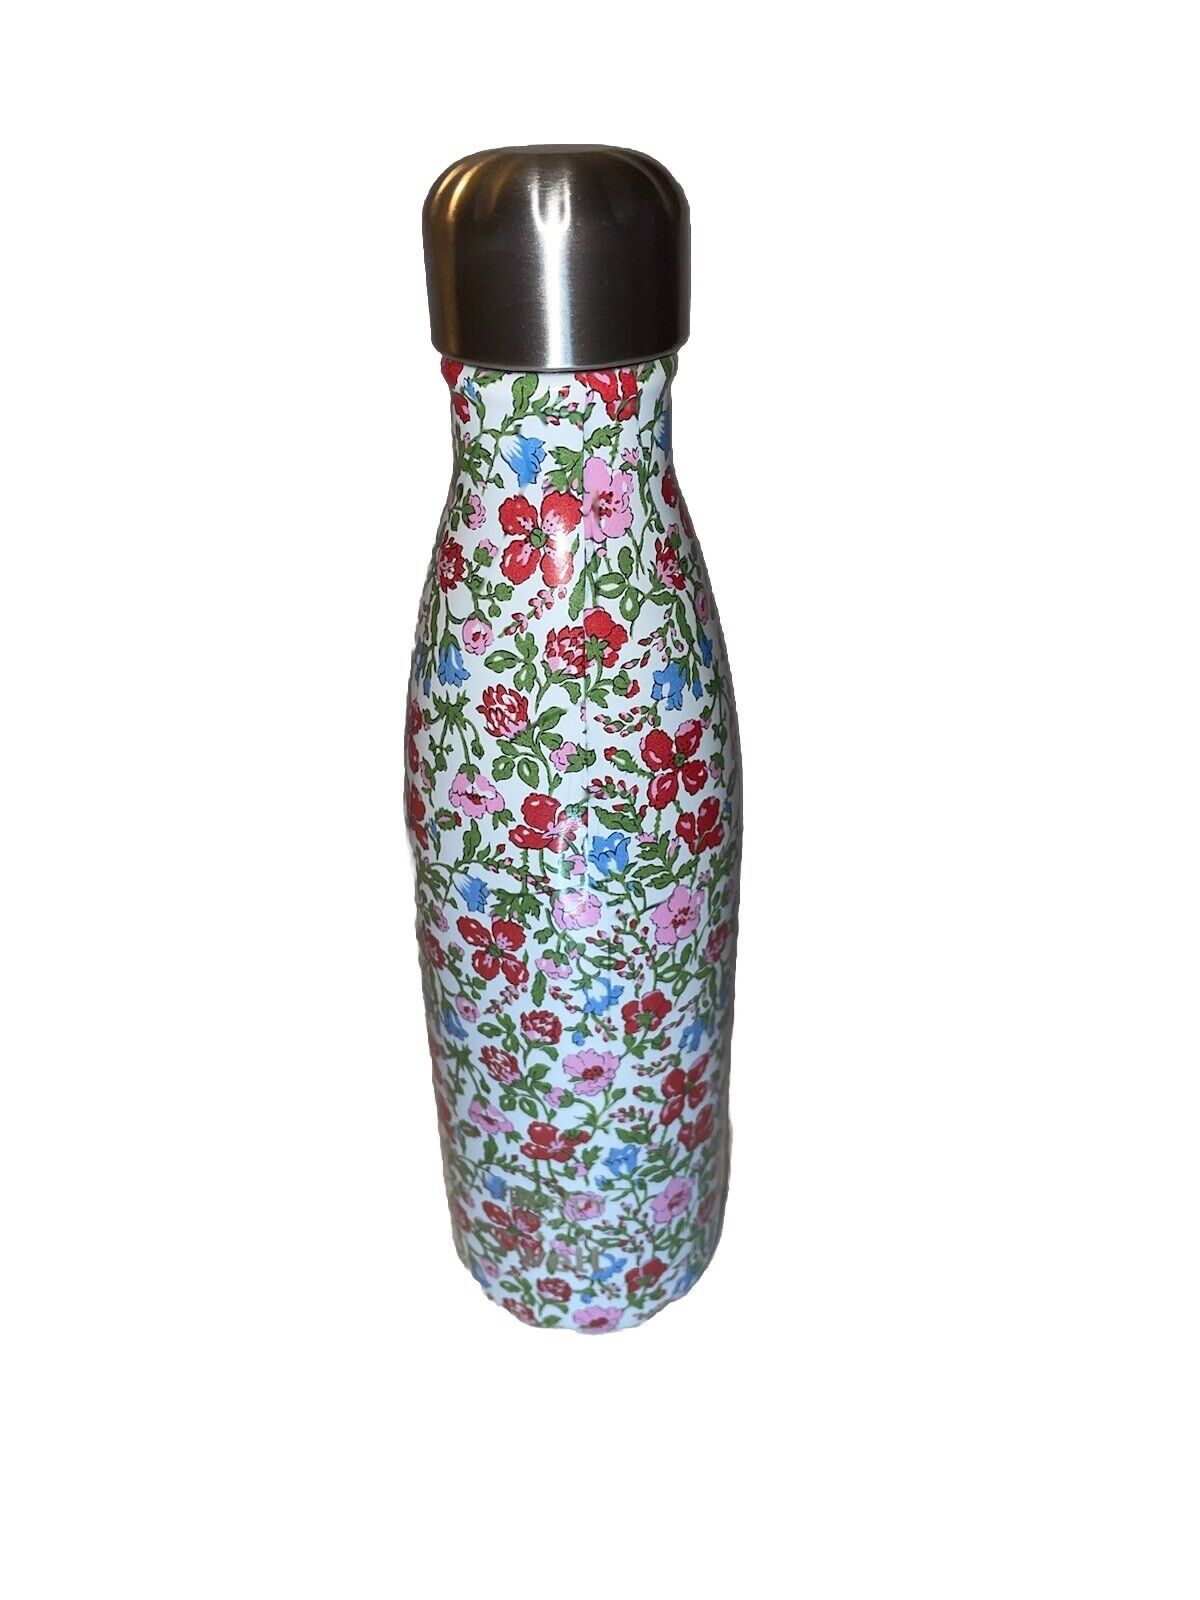 Starbucks S\'well Swell Liberty Fabric Water Bottle Stainless Steel 17oz Tumbler